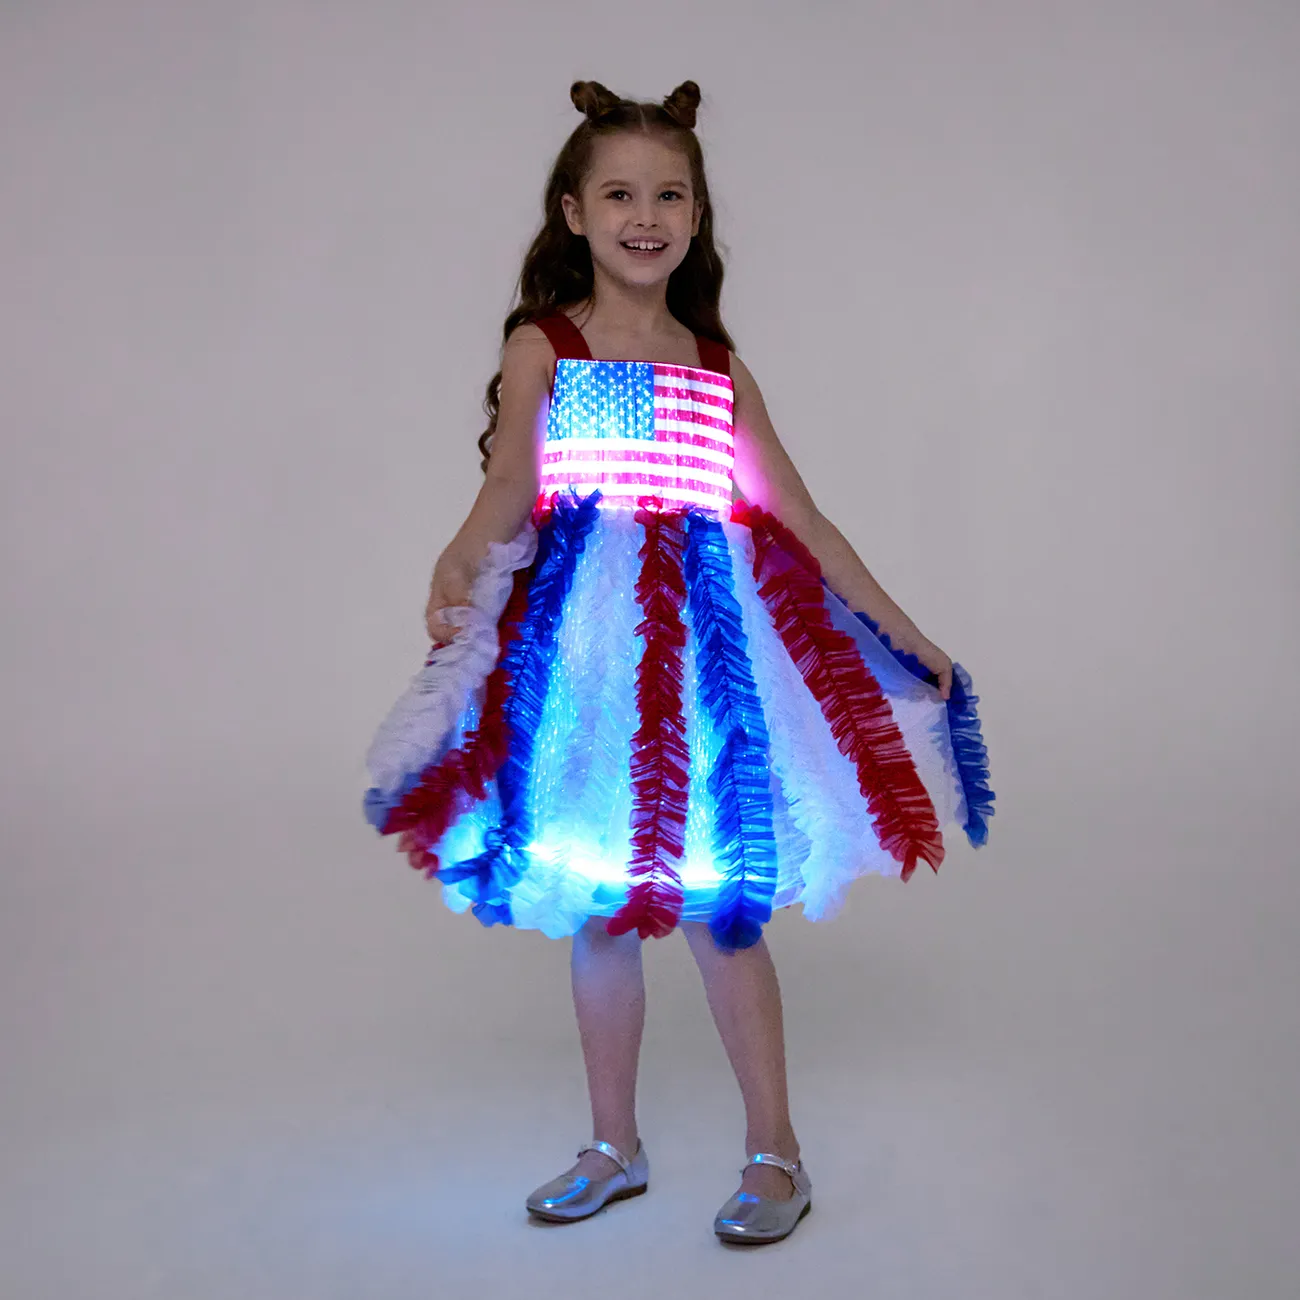 Go-Glow Light Up Princess Party Dress with Blue and Red Ruffled Skirt Including Controller (Battery Inside) Blue&Red big image 1